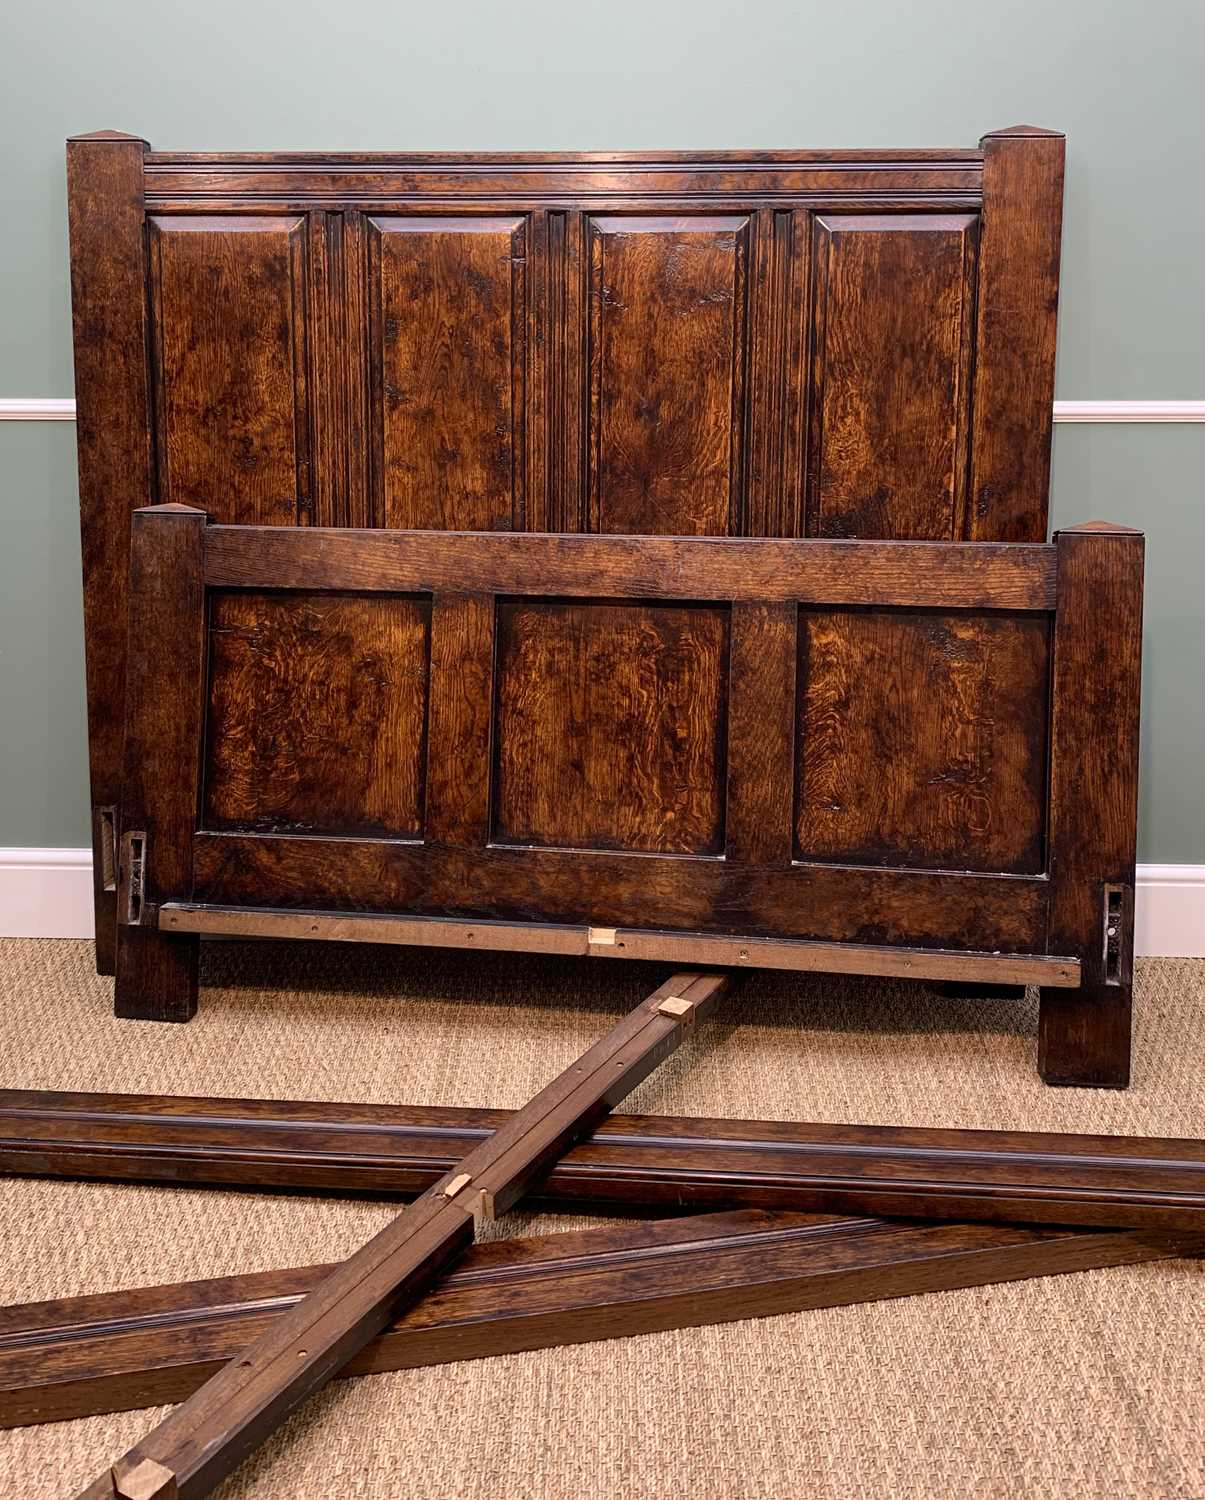 BYLAW REPRODUCTION STAINED OAK PANELLED DOUBLE BED in the 17th Century style, head board, foot board - Image 3 of 3